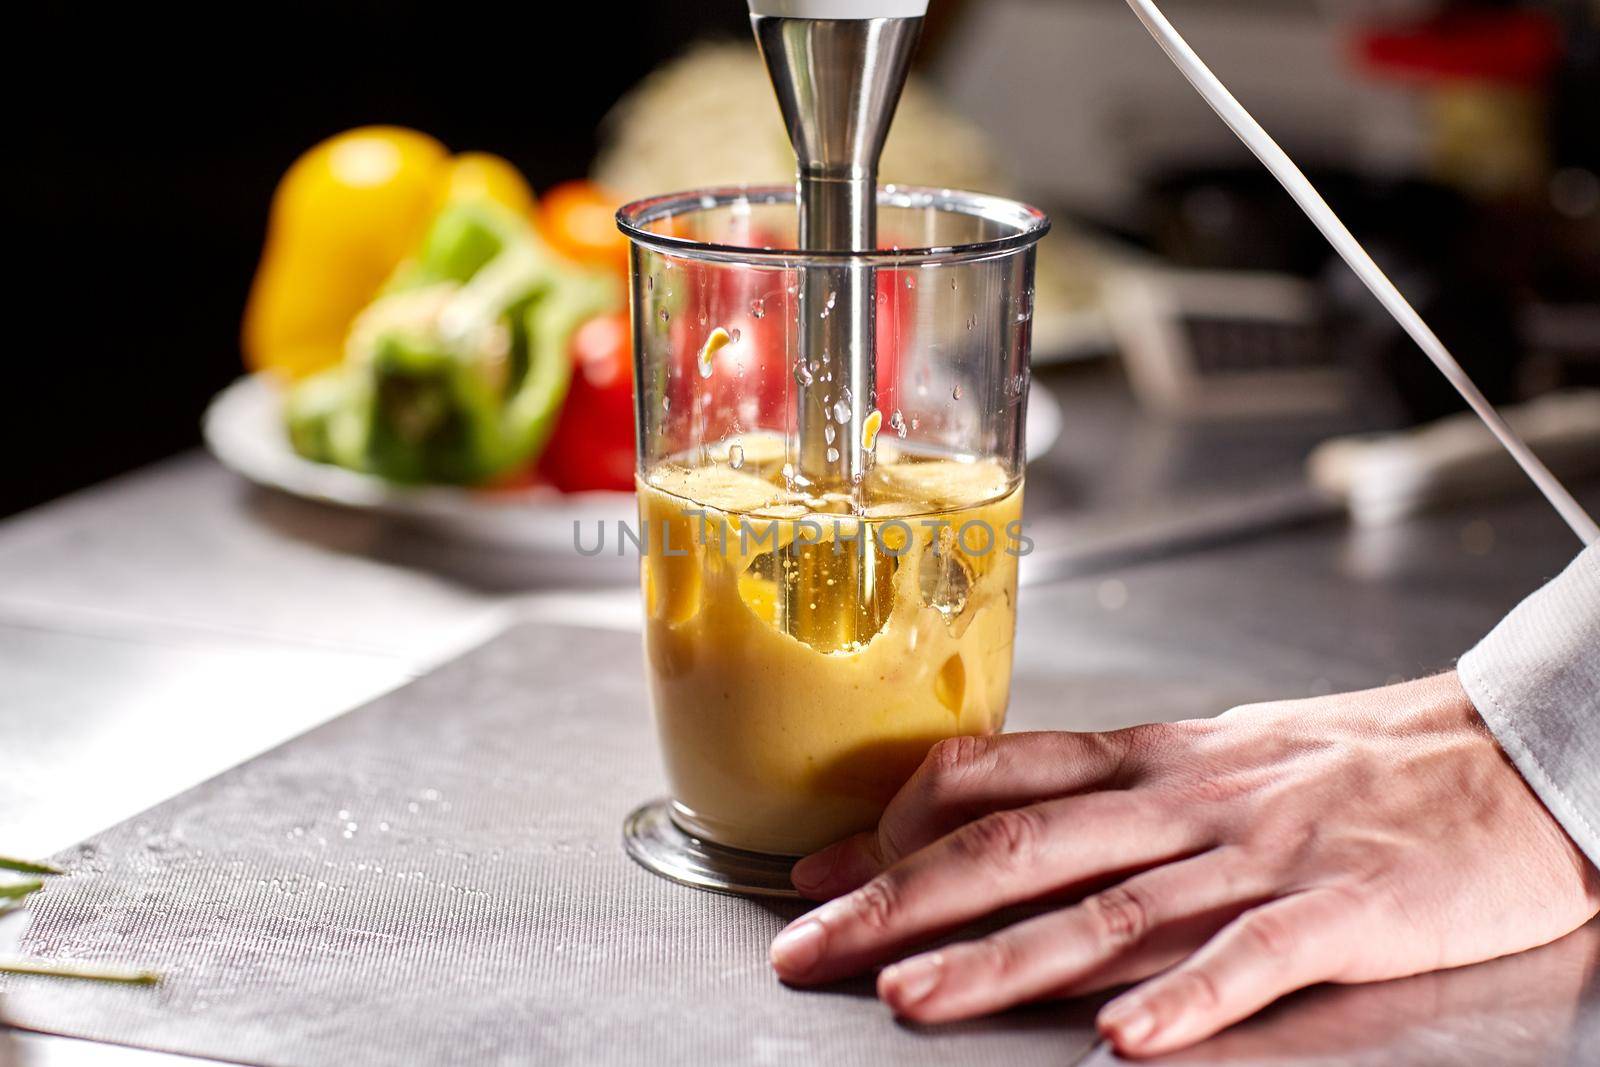 Beating of homemade mayonnaise with olive oil. Mix ingredients for sauce. The chef uses a blender. Step by step sauce preparation.